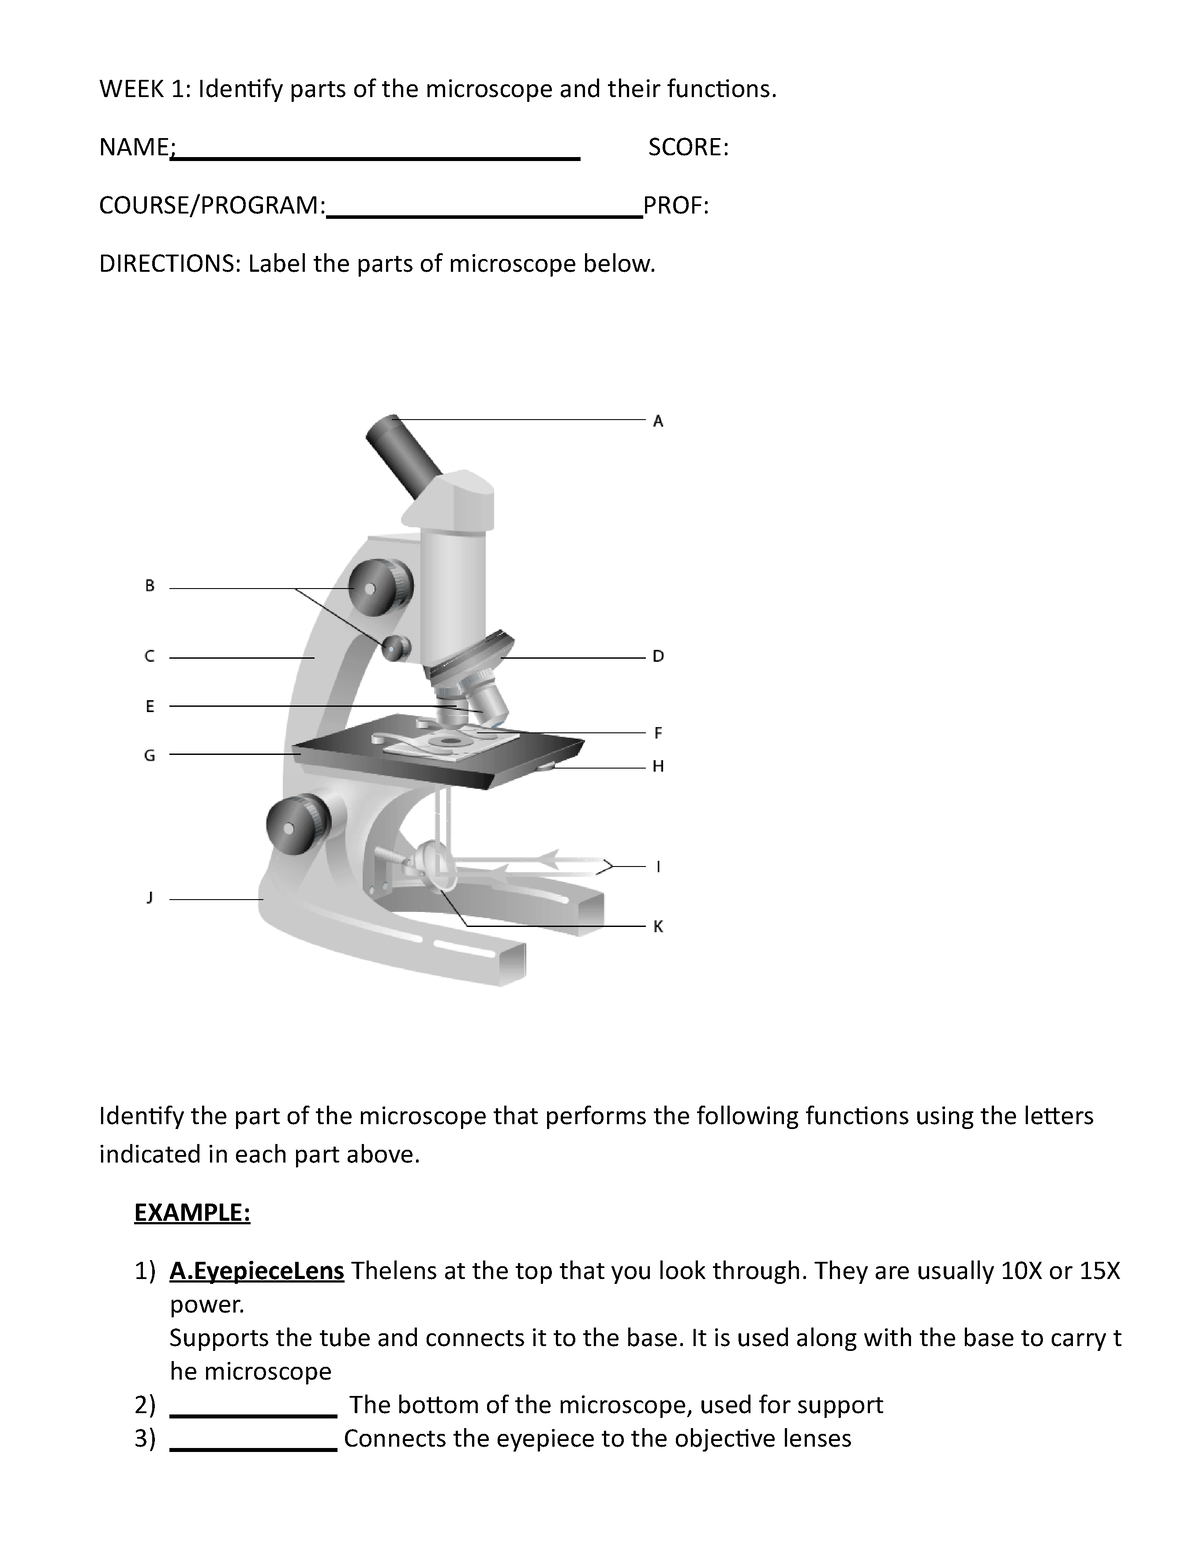 POI- Group-1 - Done - WEEK 1: Identify parts of the microscope and ...